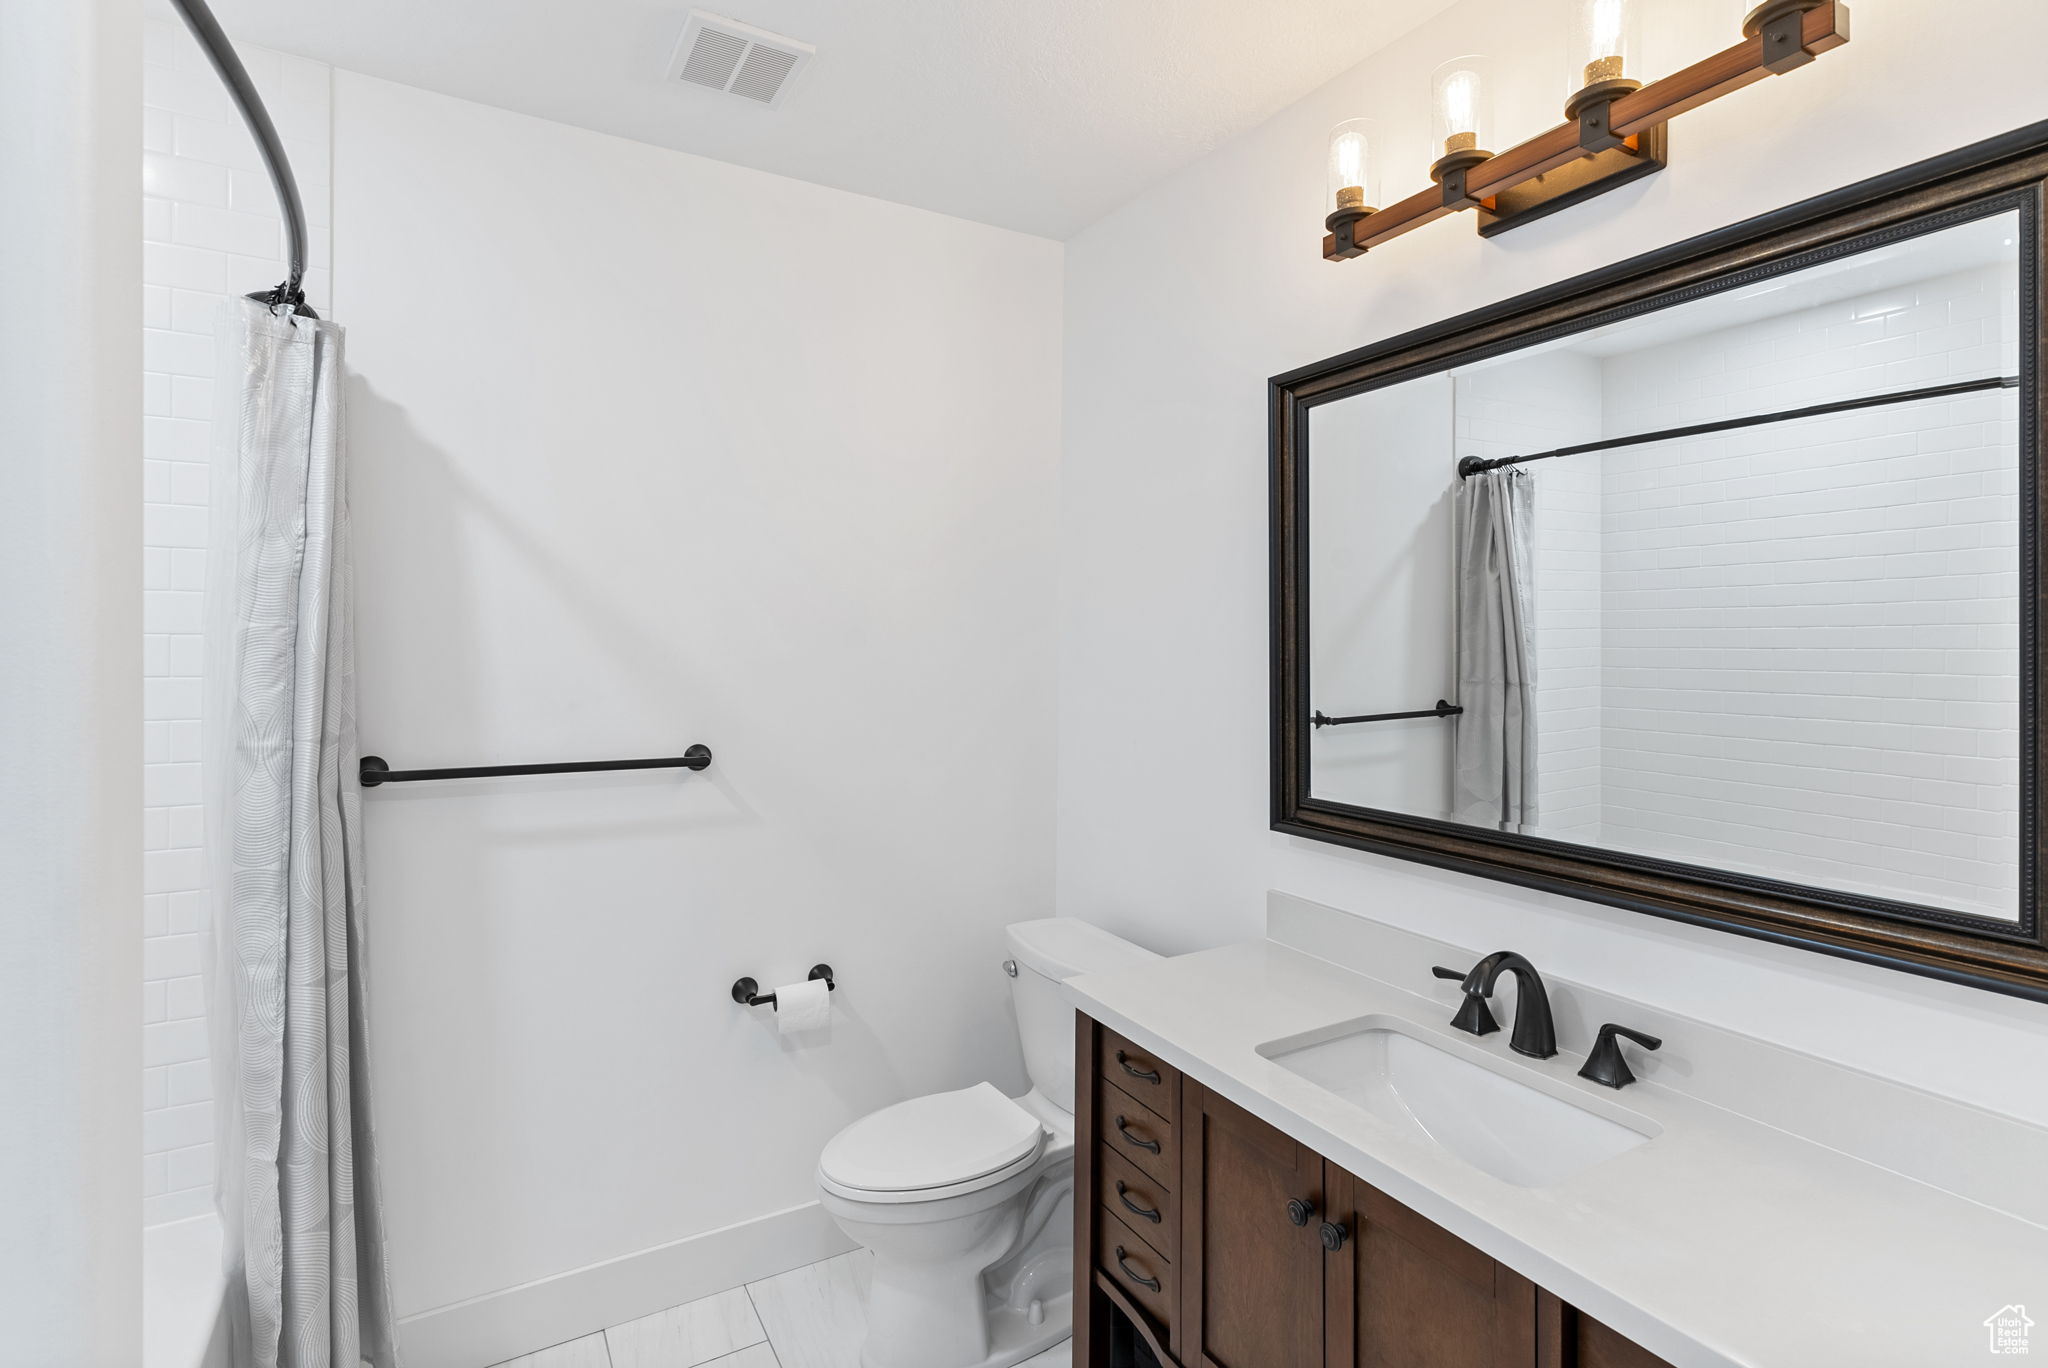 Full bathroom featuring toilet, shower / tub combo with curtain, tile flooring, and vanity with extensive cabinet space